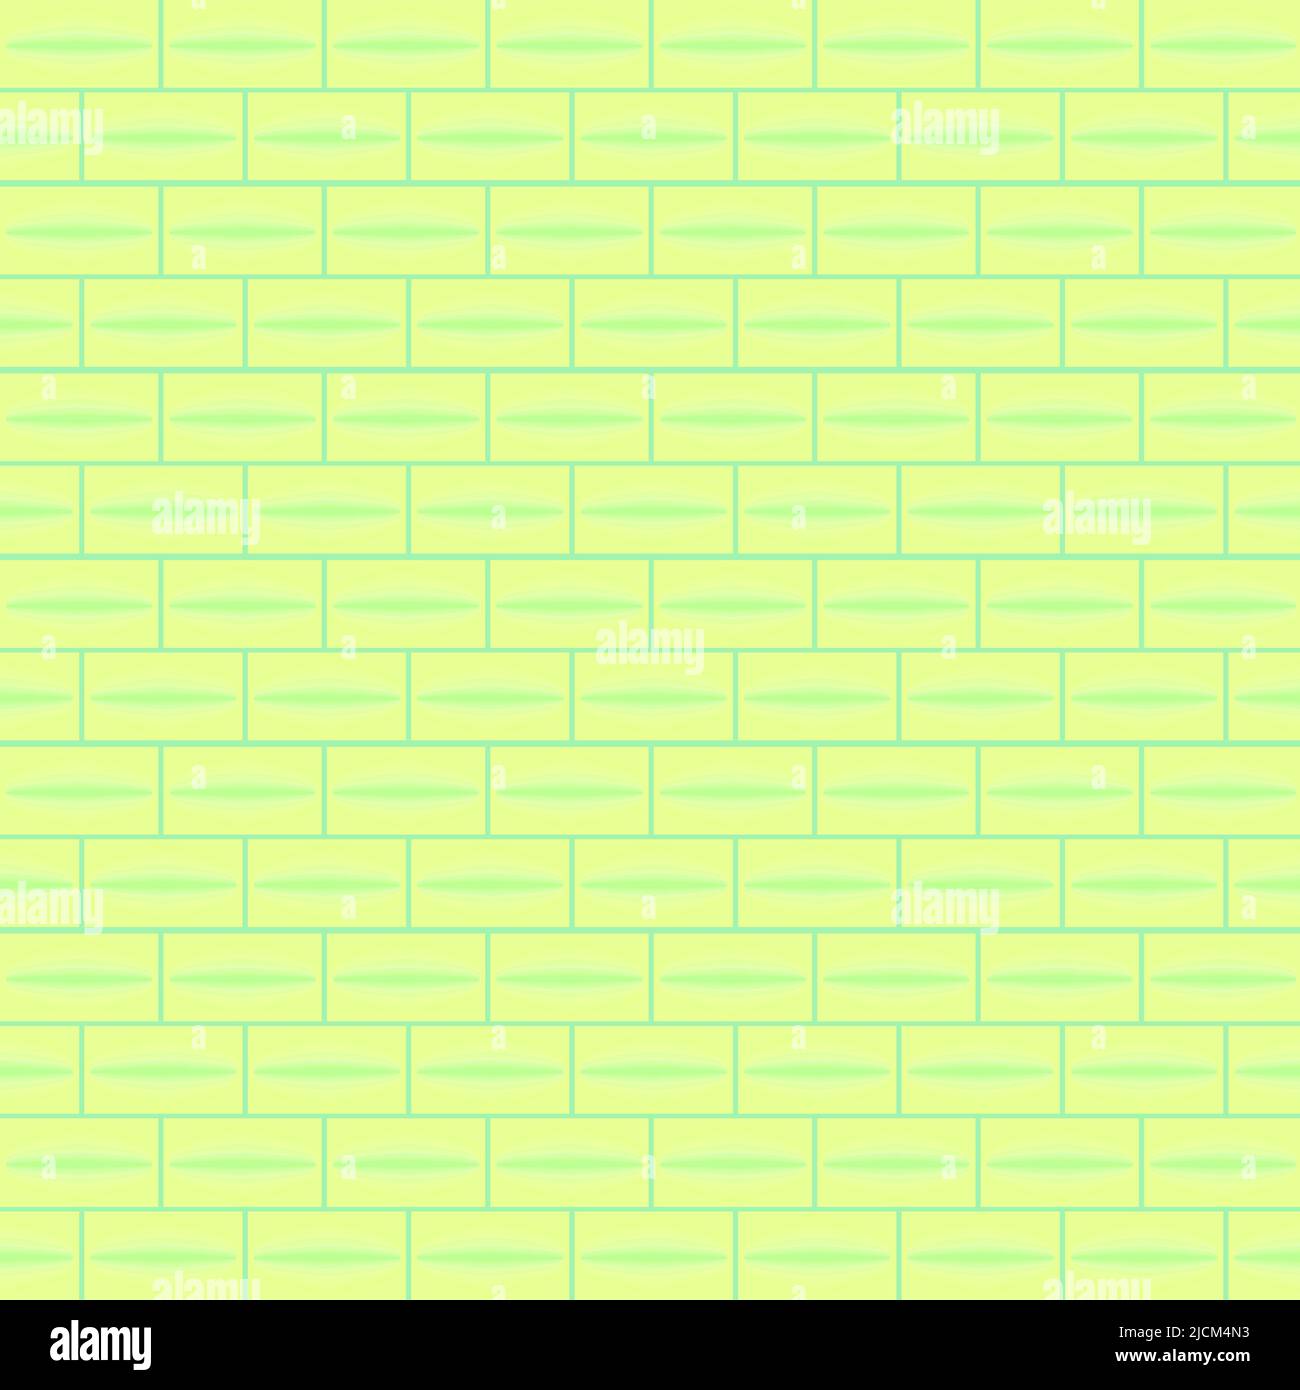 Brick wall green colorful backgrounds wallpaper decoration pattern seamless vector illustration Stock Vector